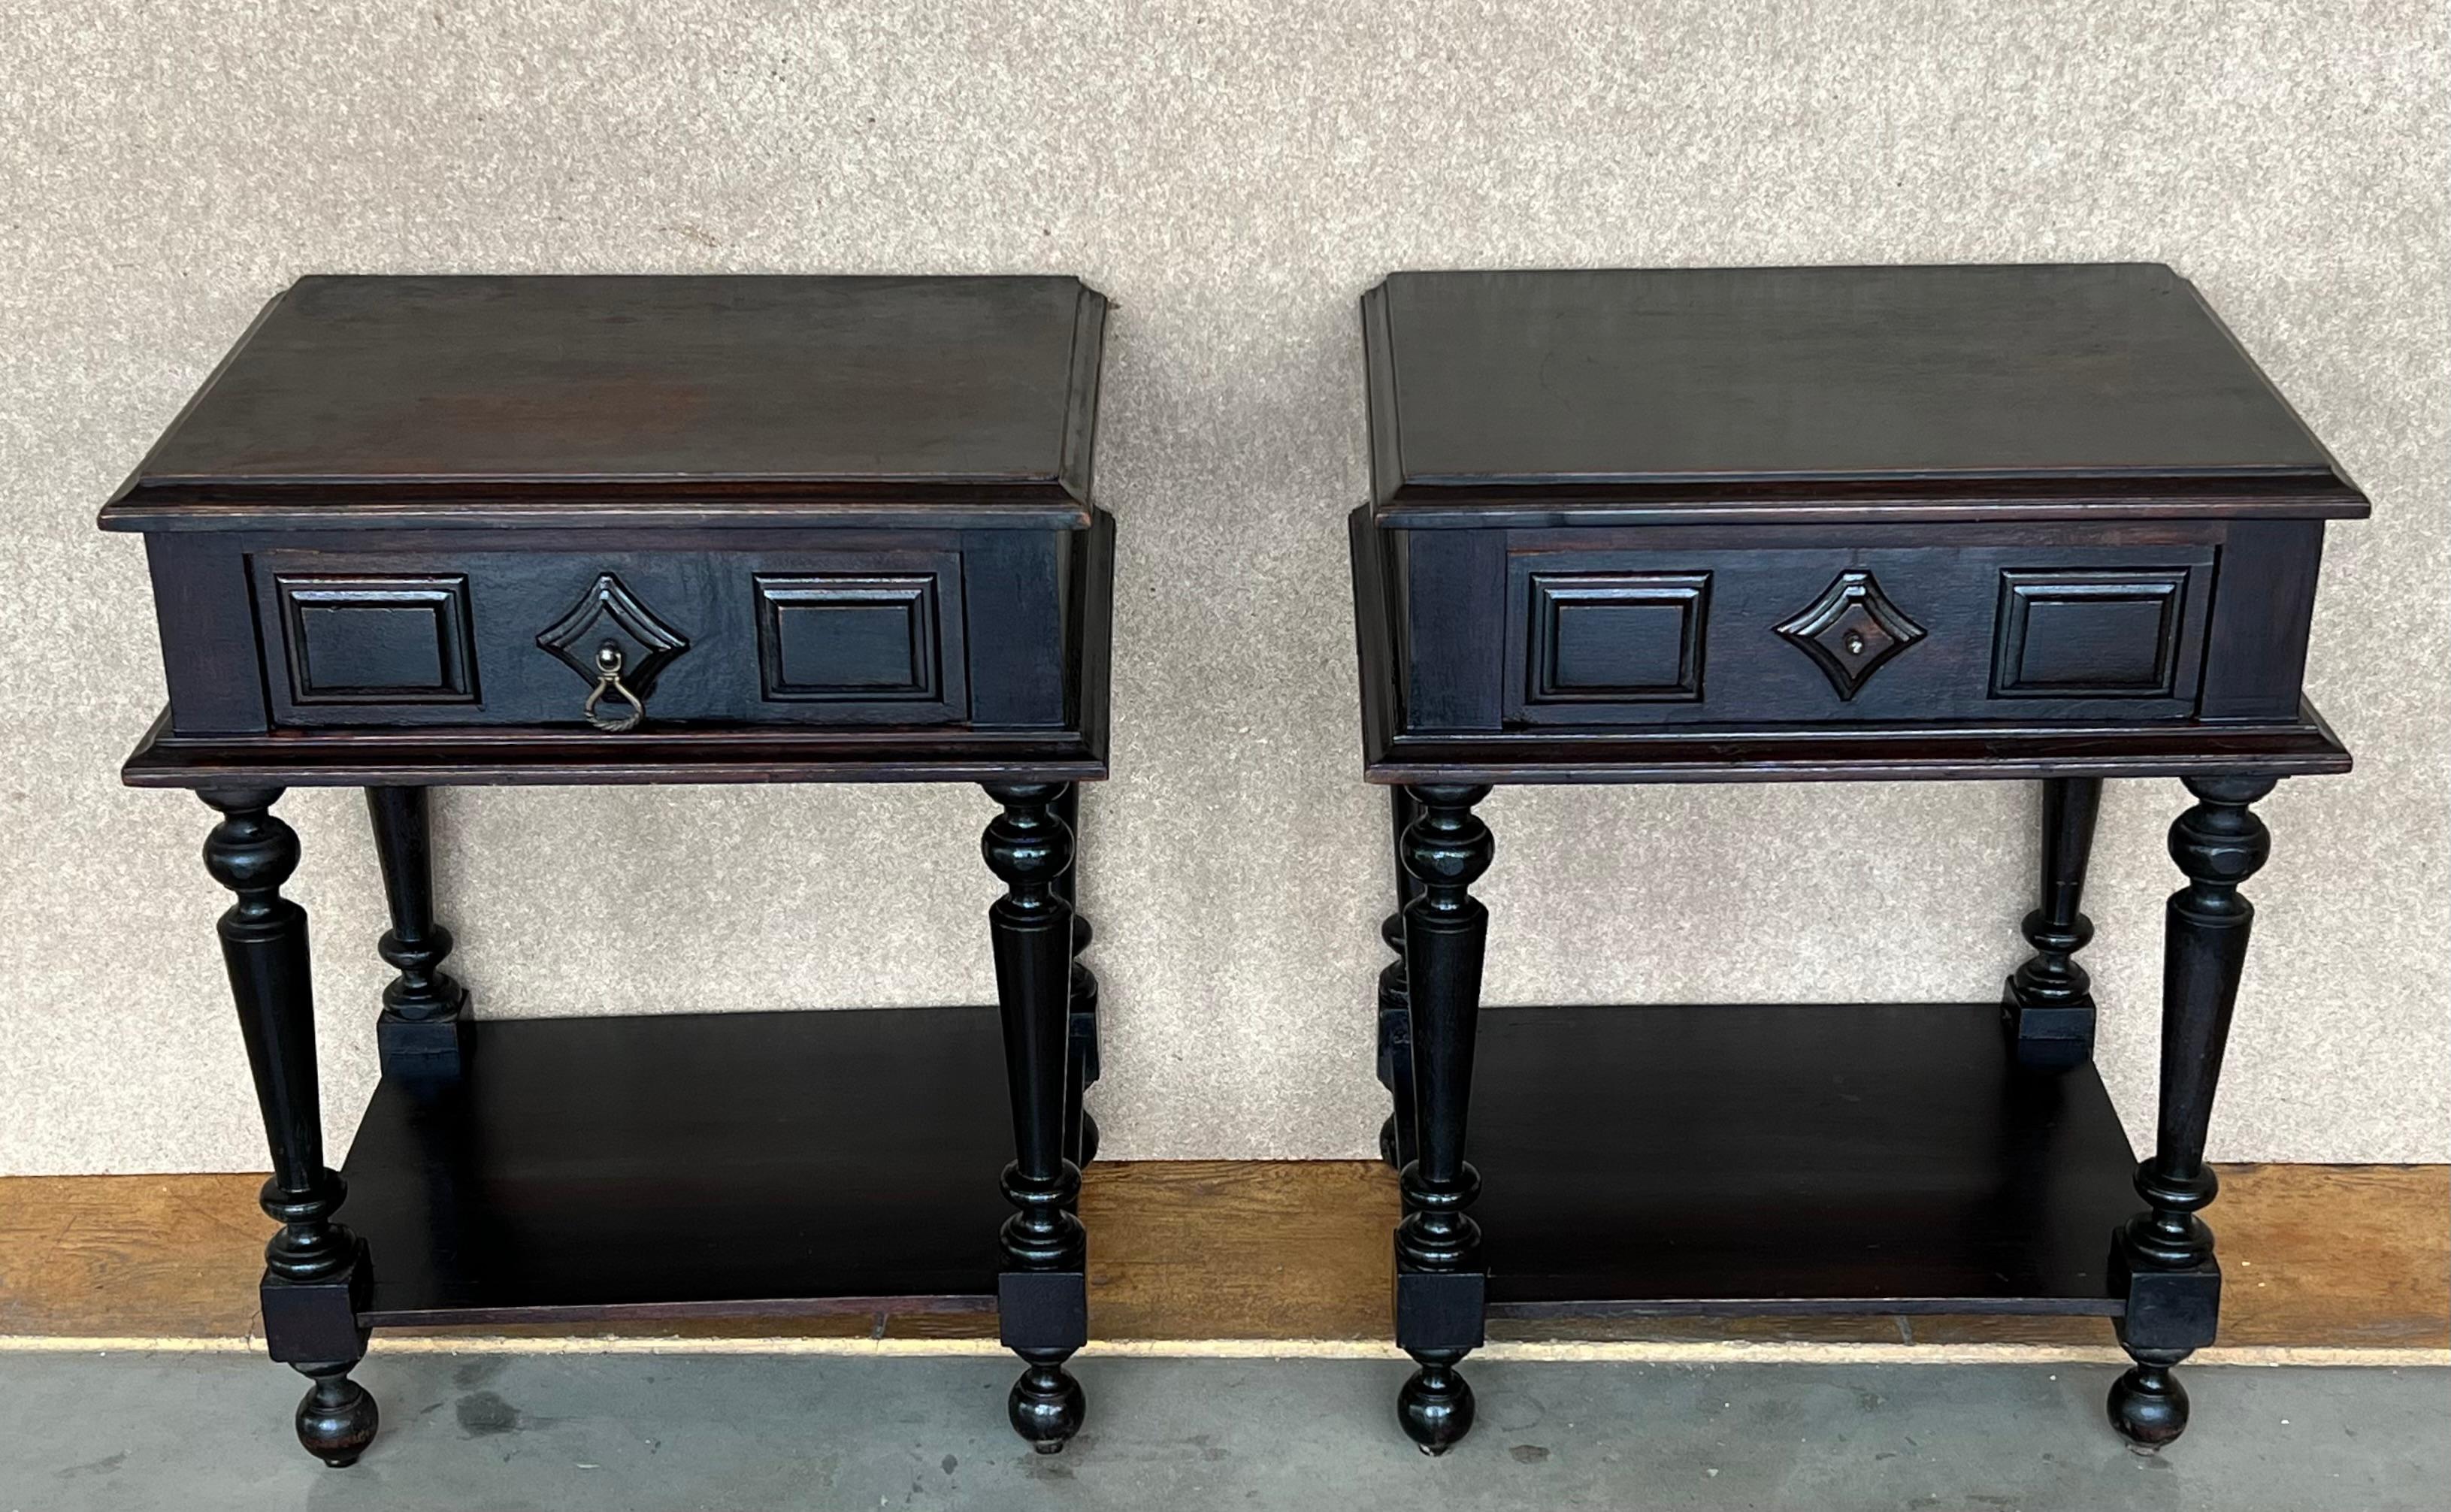 20th century pair of solid carved French nightstands with Turned columns and Low shelve.
It has one carved drawer with original bronze pull.